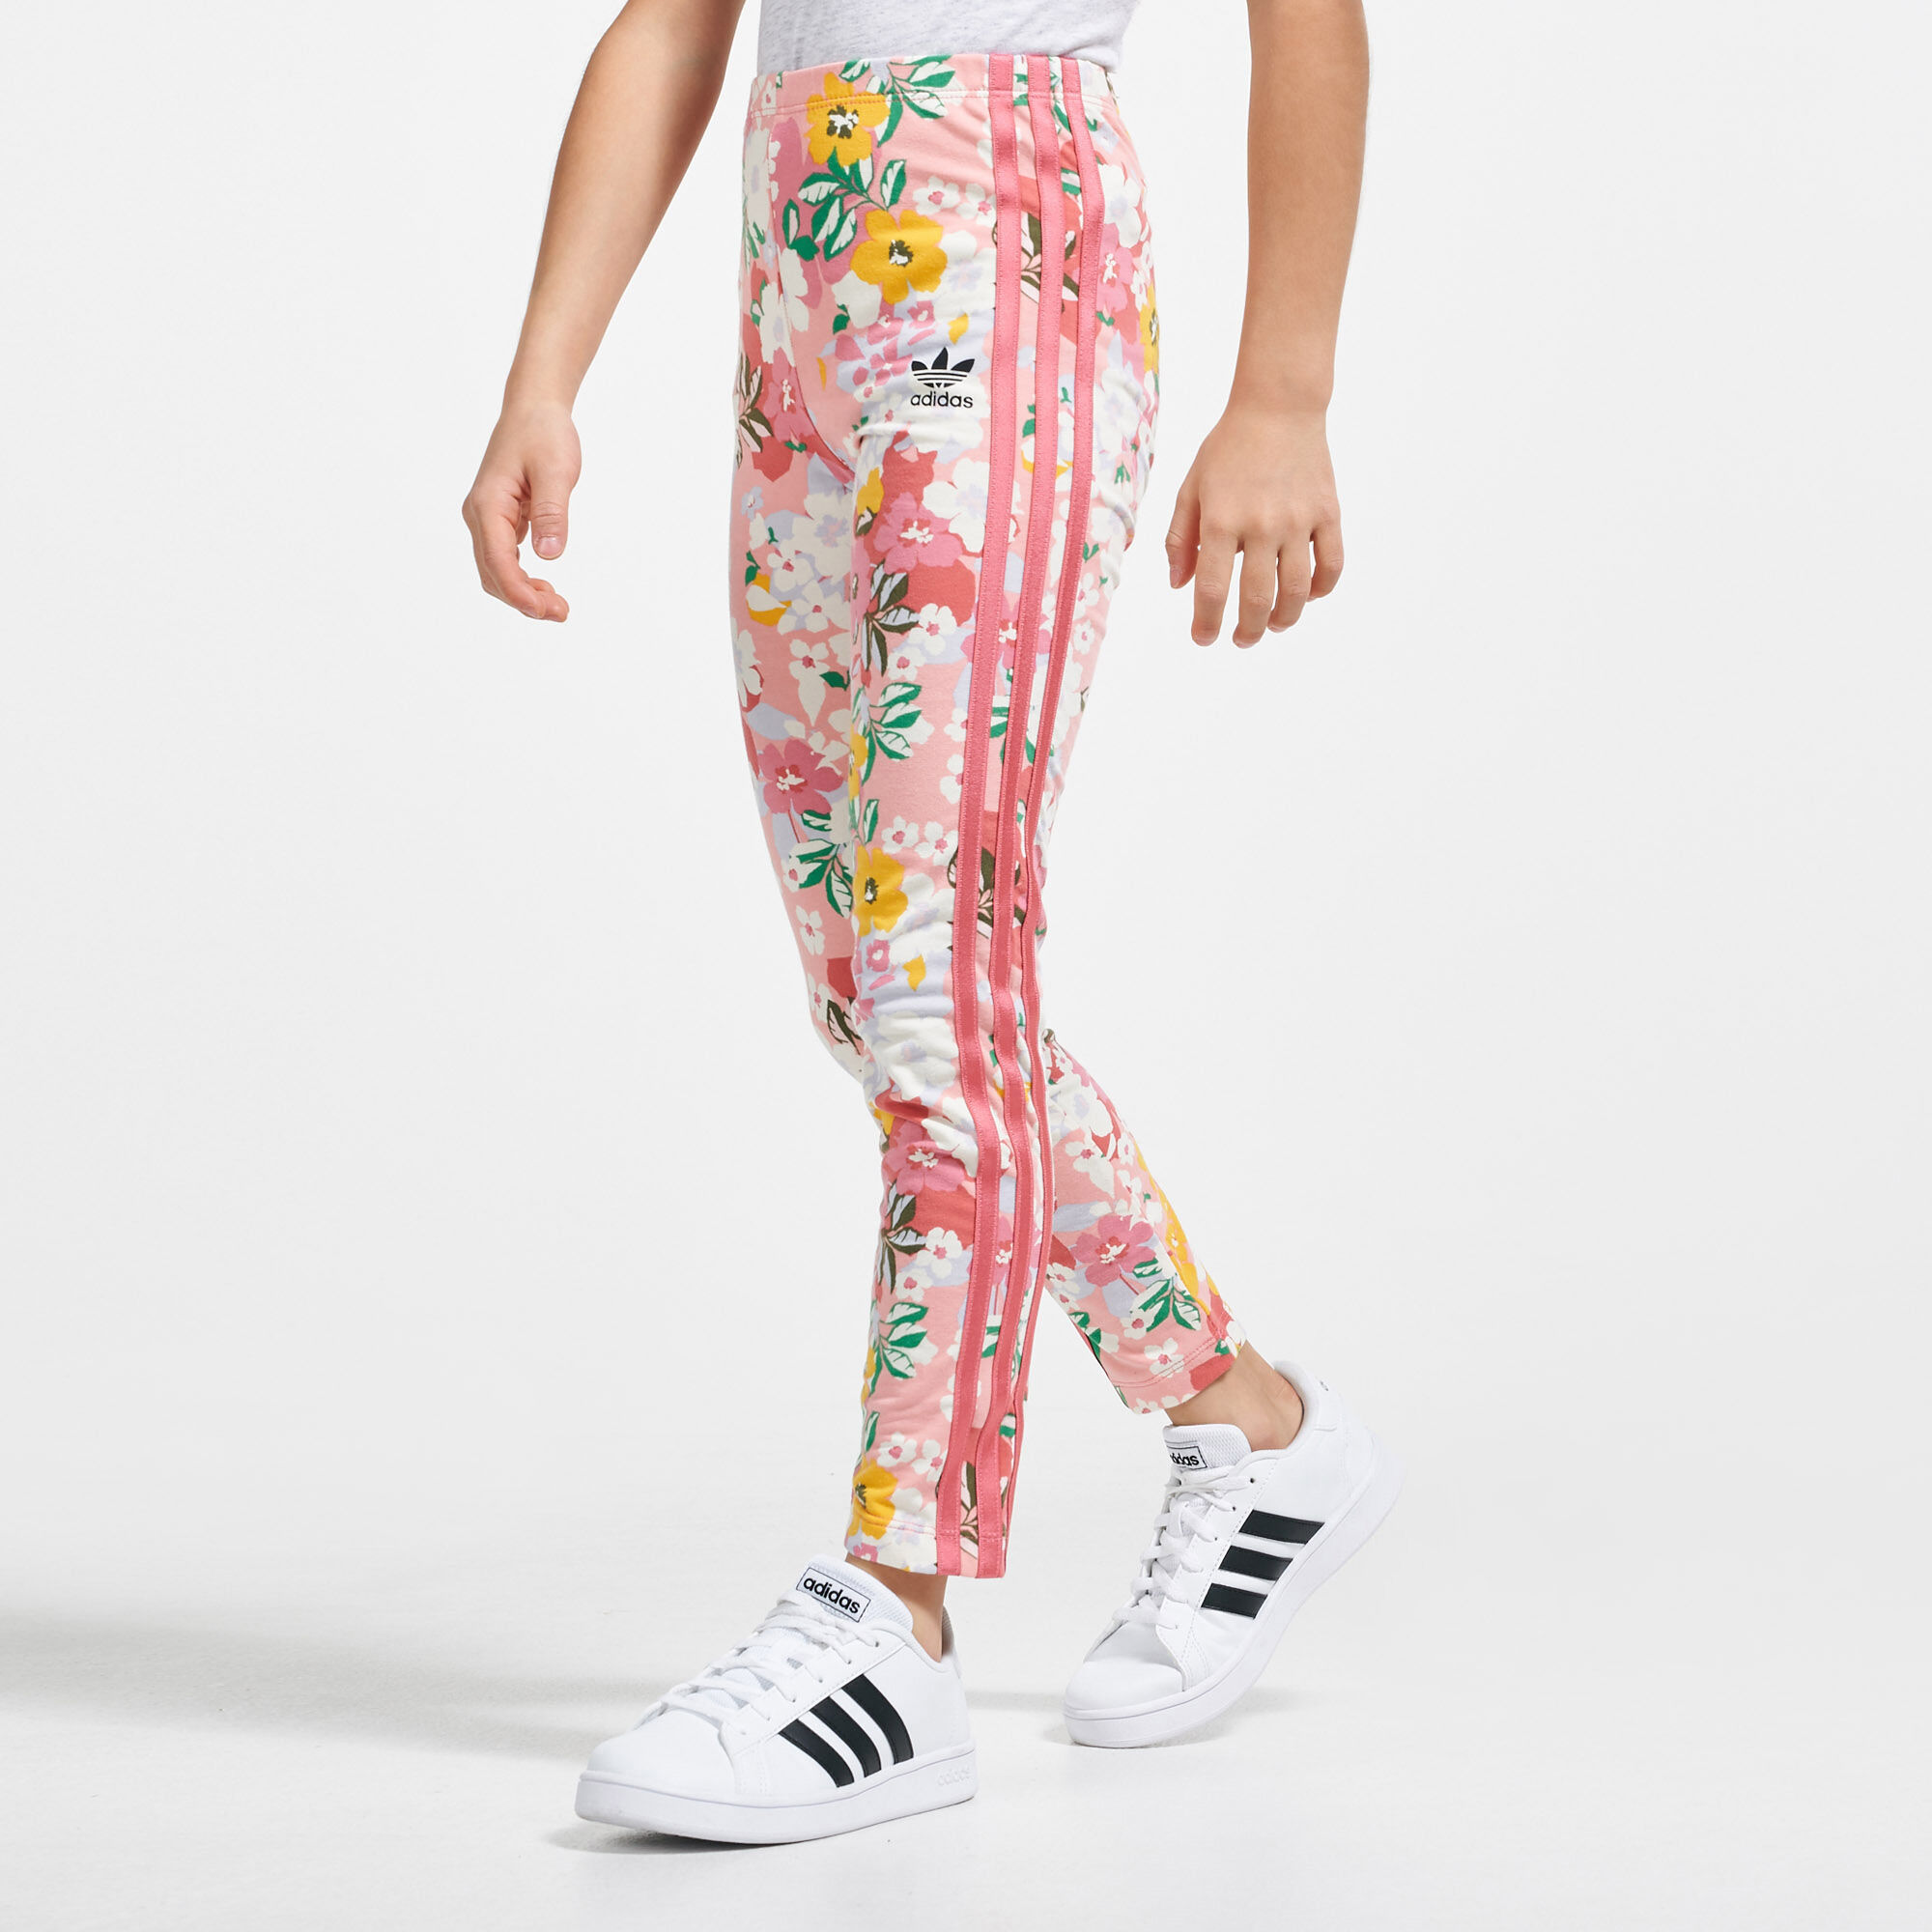 What Goes With Adidas Leggings? – solowomen